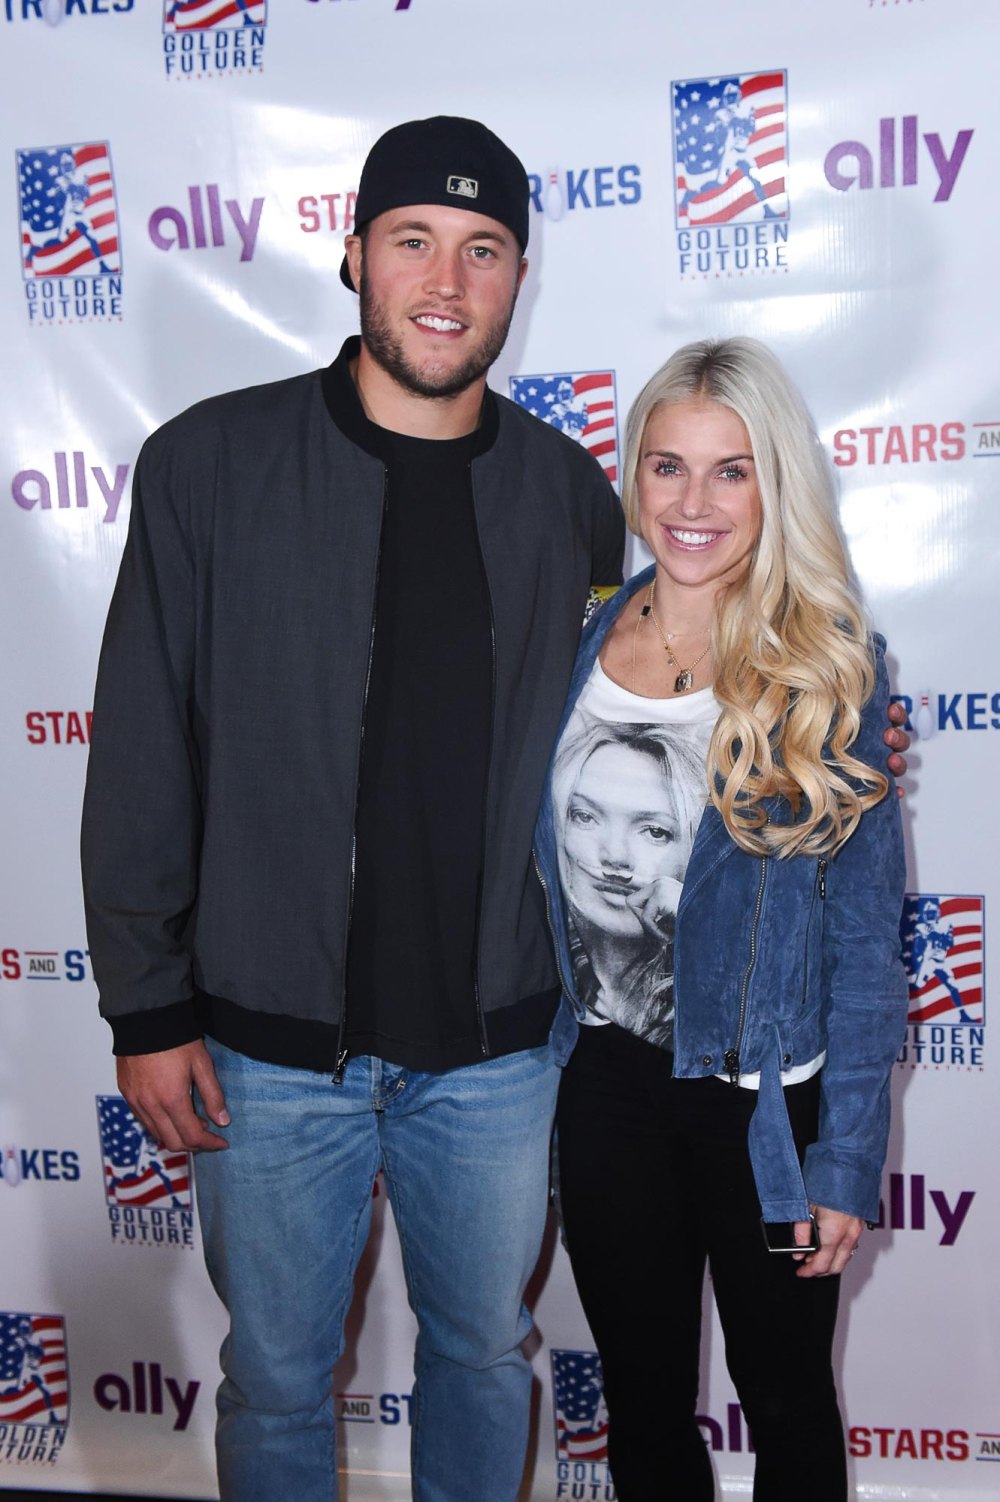 Matthew Stafford's Wife Kelly Dates Backup Quarterback To Make Her Jealous In College It Works 807